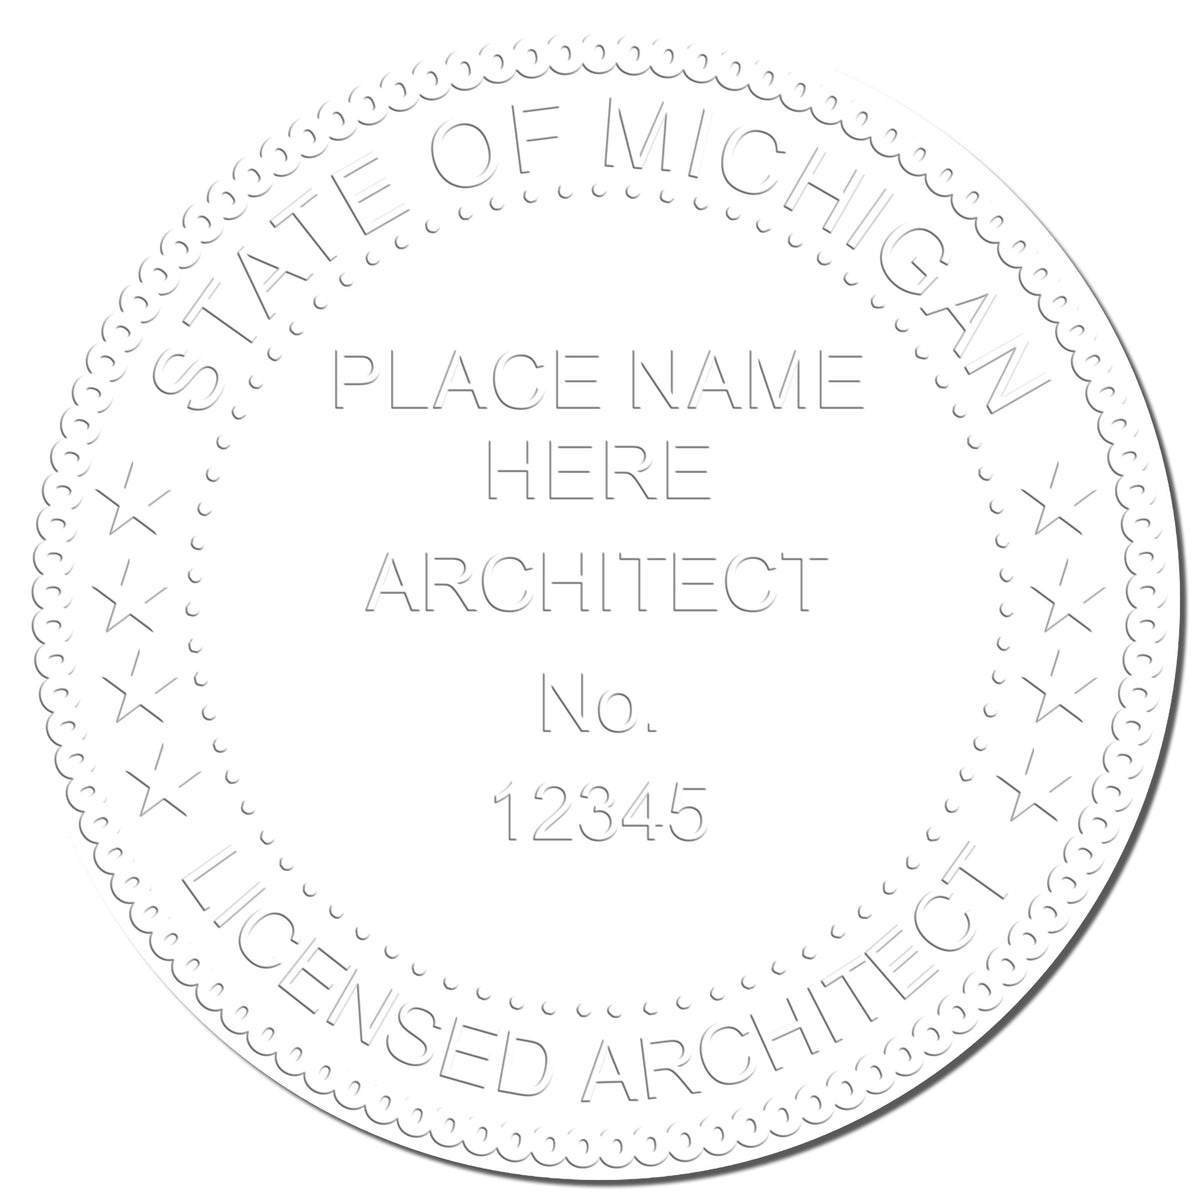 A photograph of the Michigan Desk Architect Embossing Seal stamp impression reveals a vivid, professional image of the on paper.